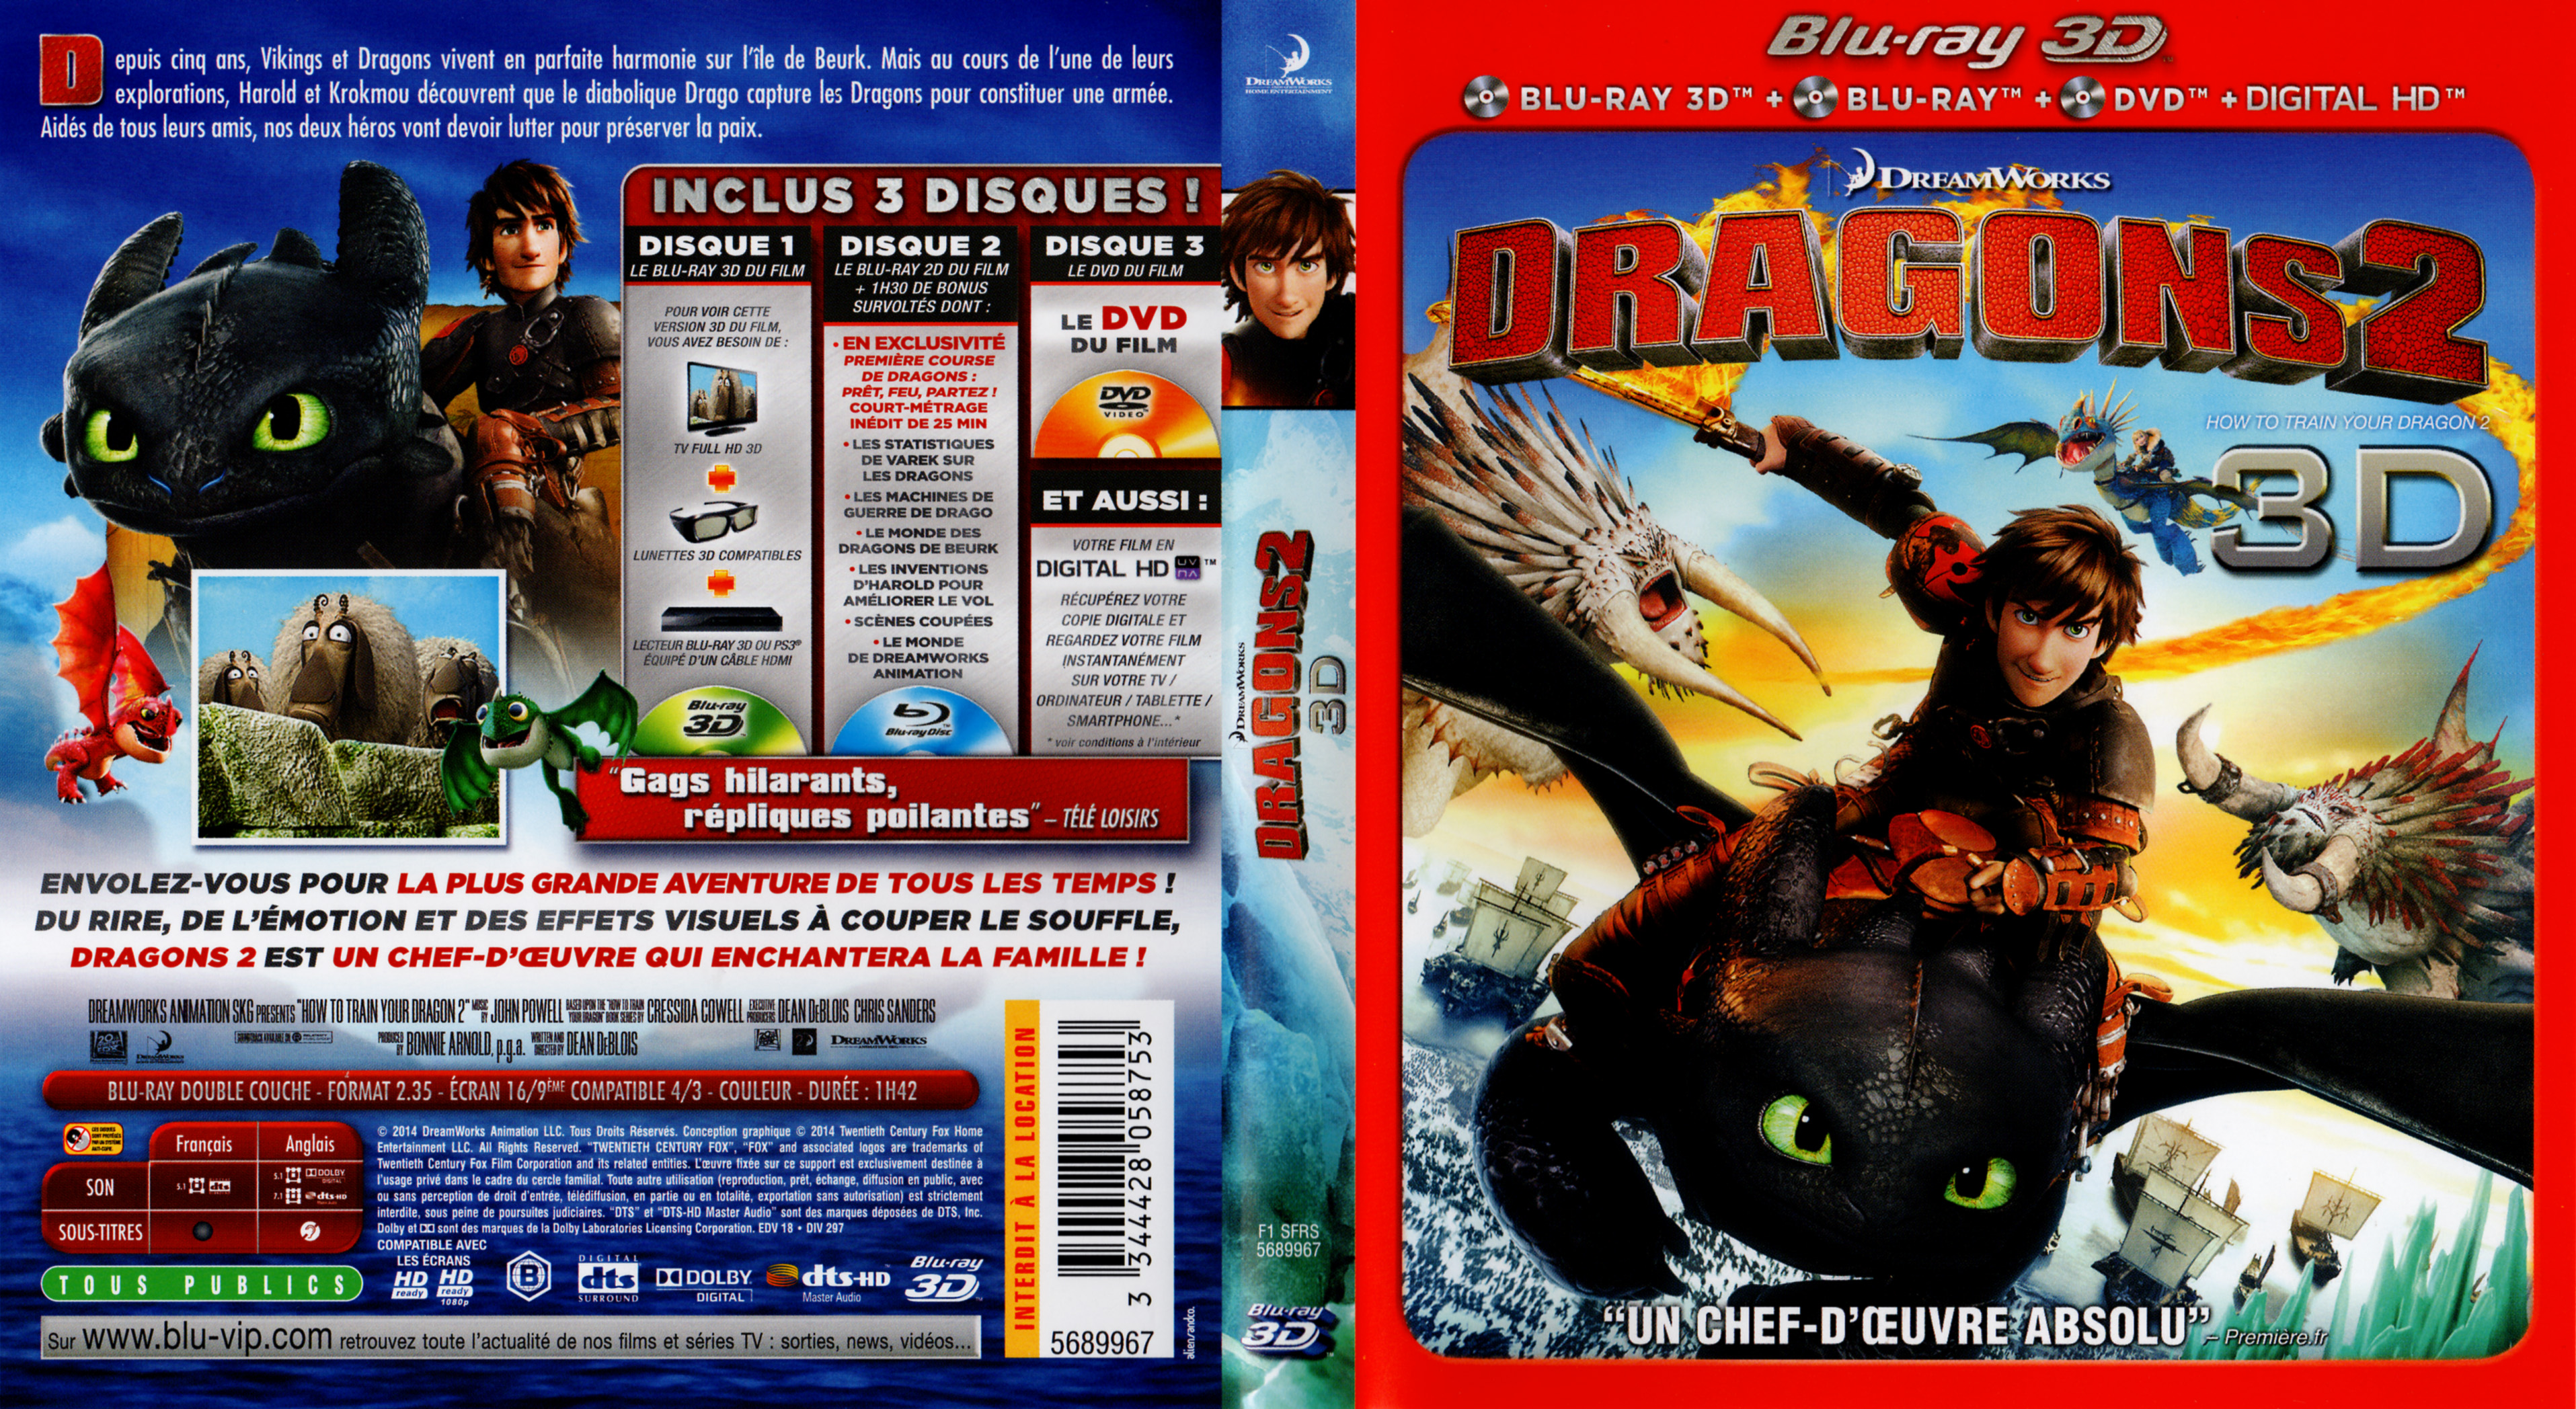 Jaquette DVD Dragons 2 3D (BLU-RAY)